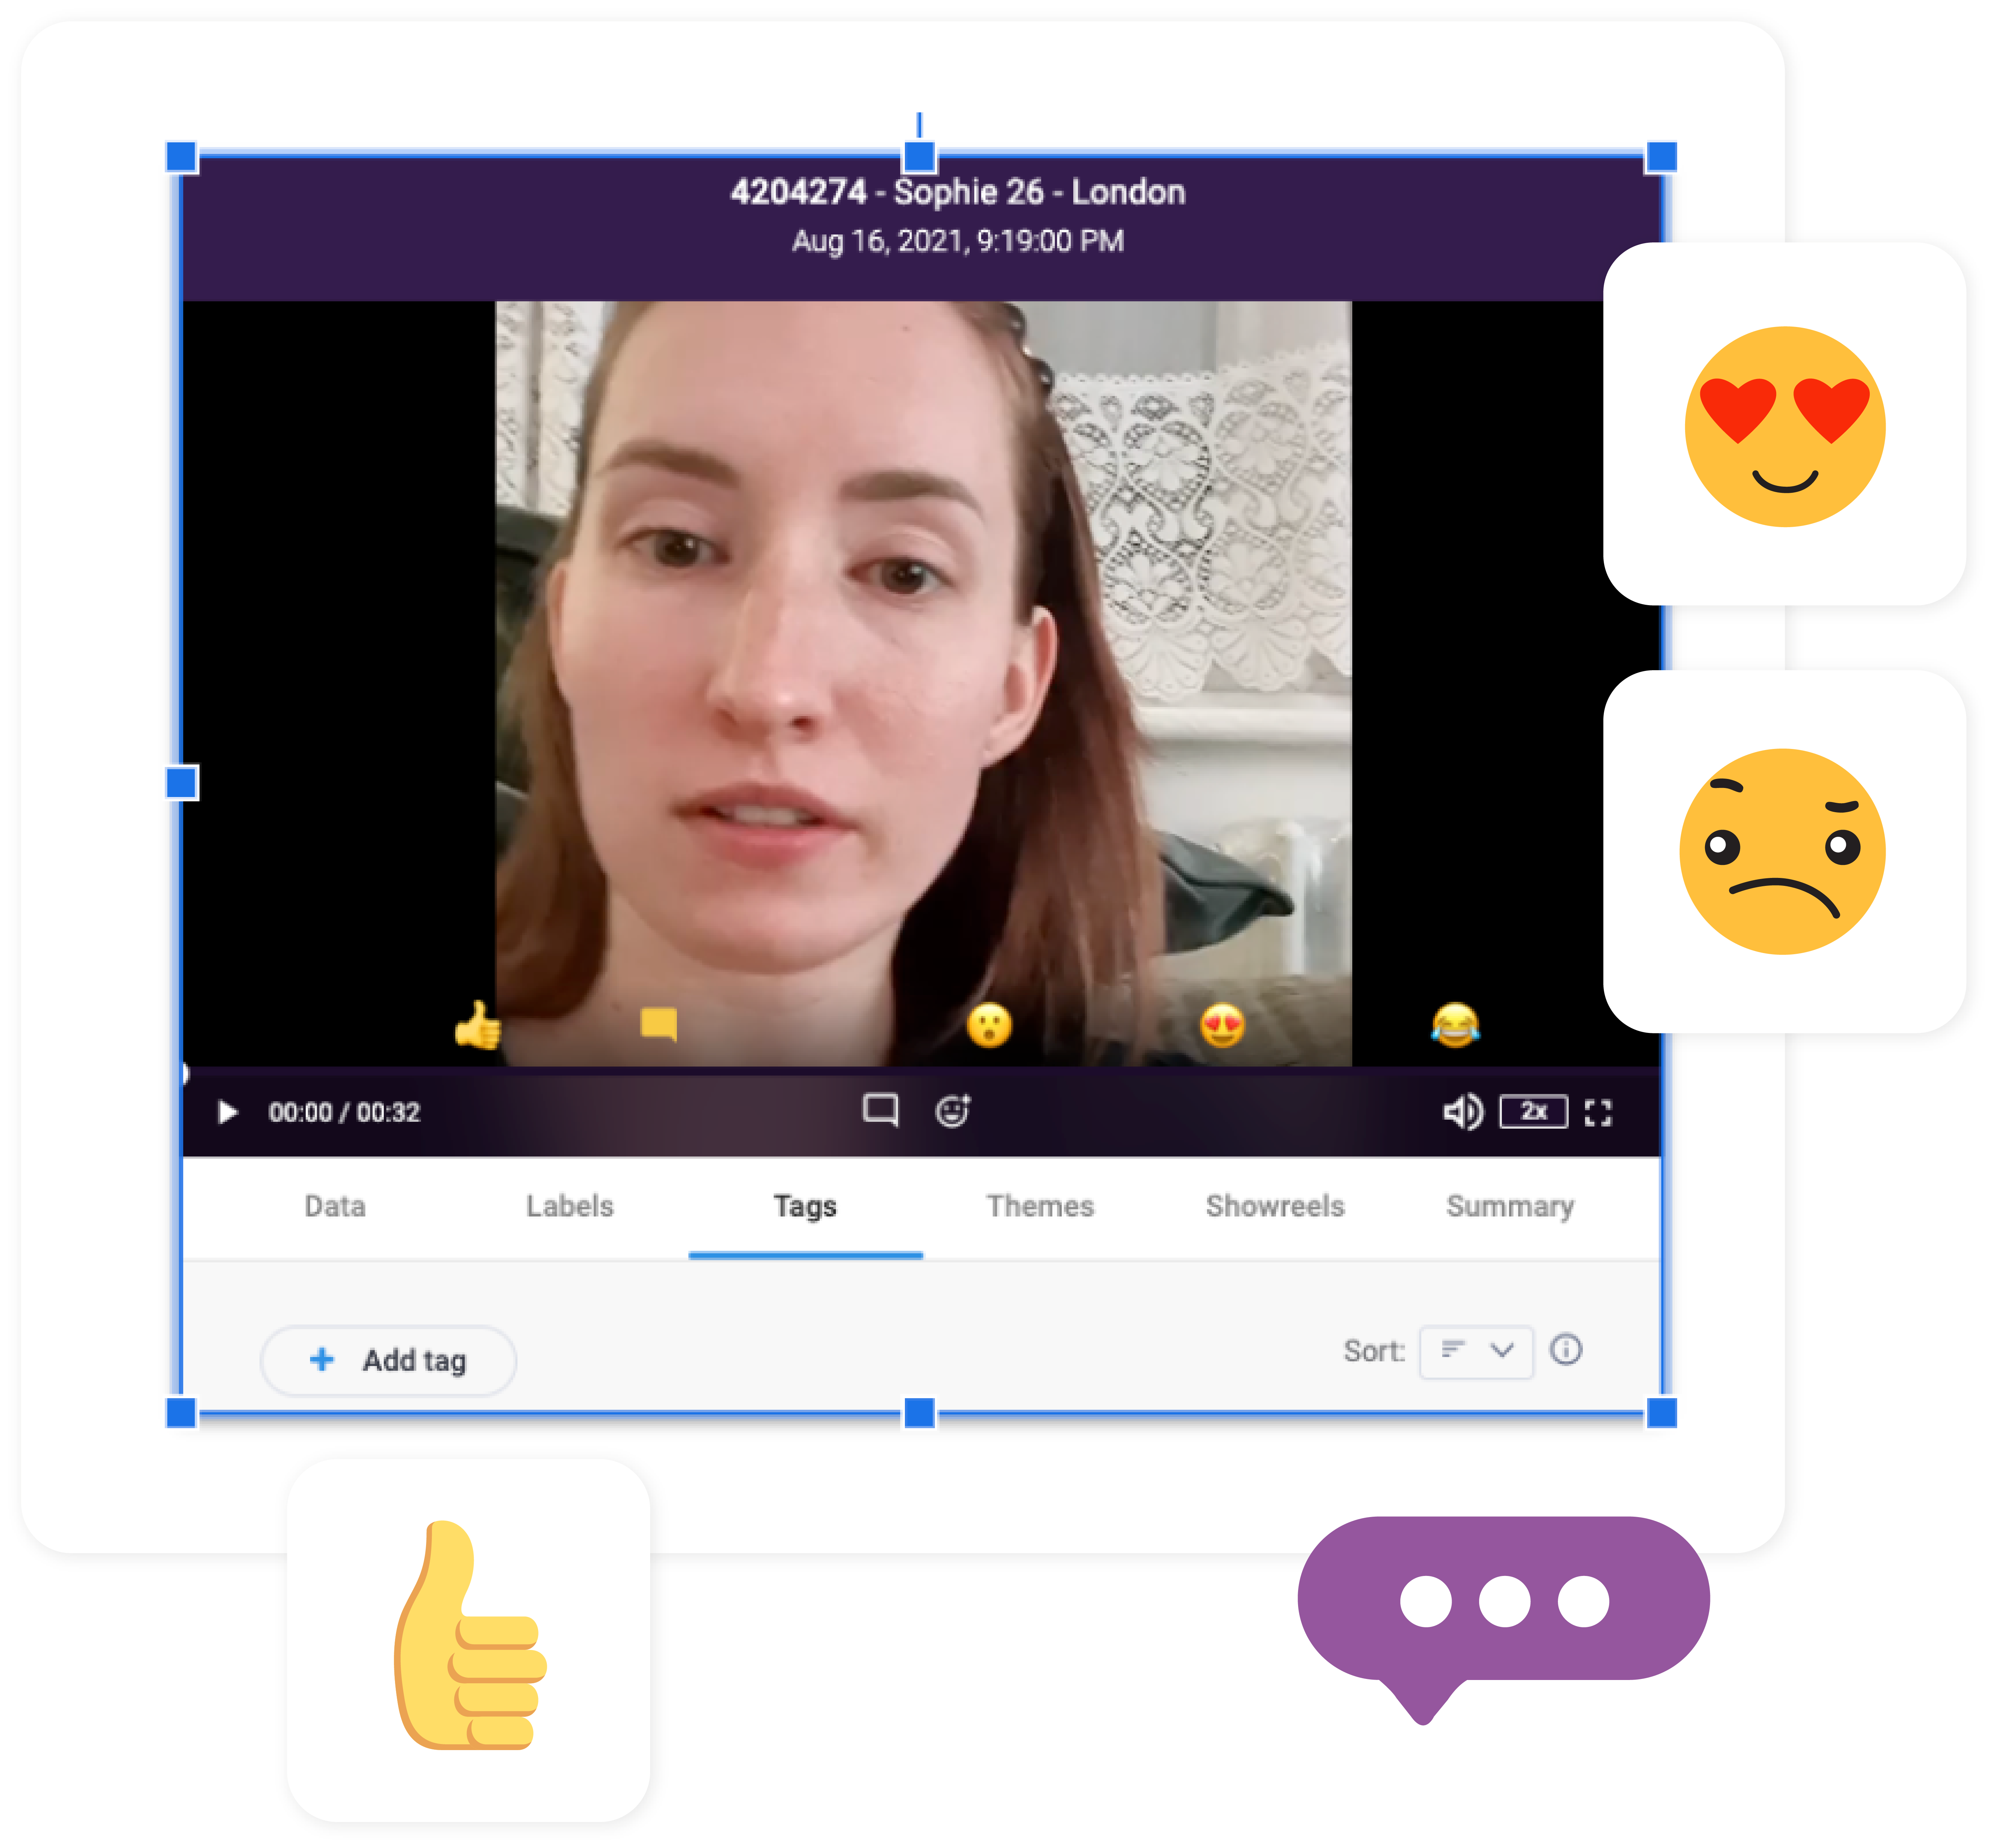 A video chat screen with a woman's face showing various emojis, showcasing the immersive Voxpopme features.